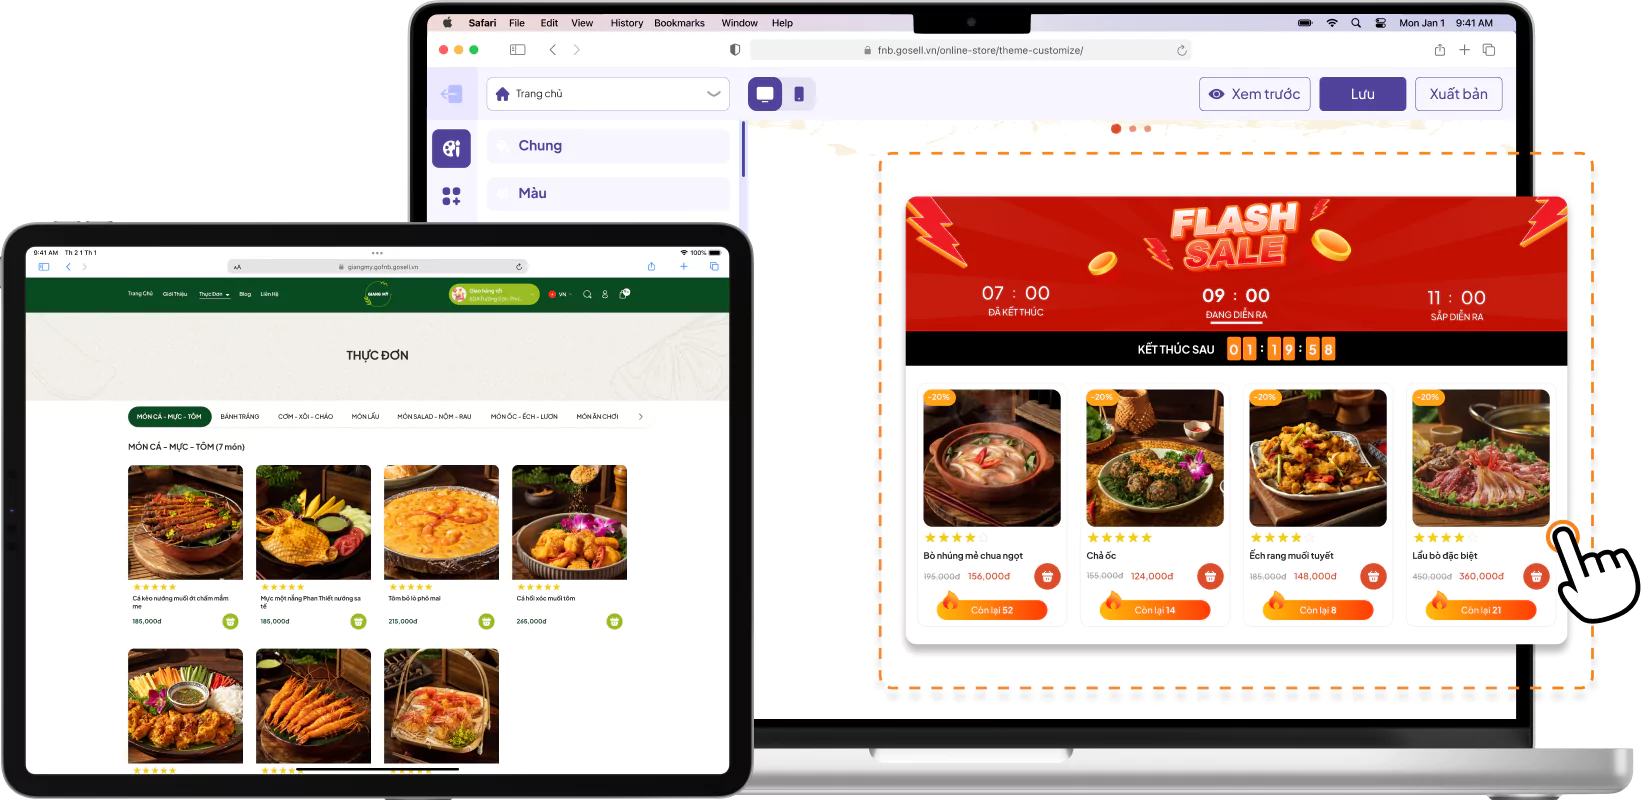 Create your food ordering website with just a few drag-and-drop